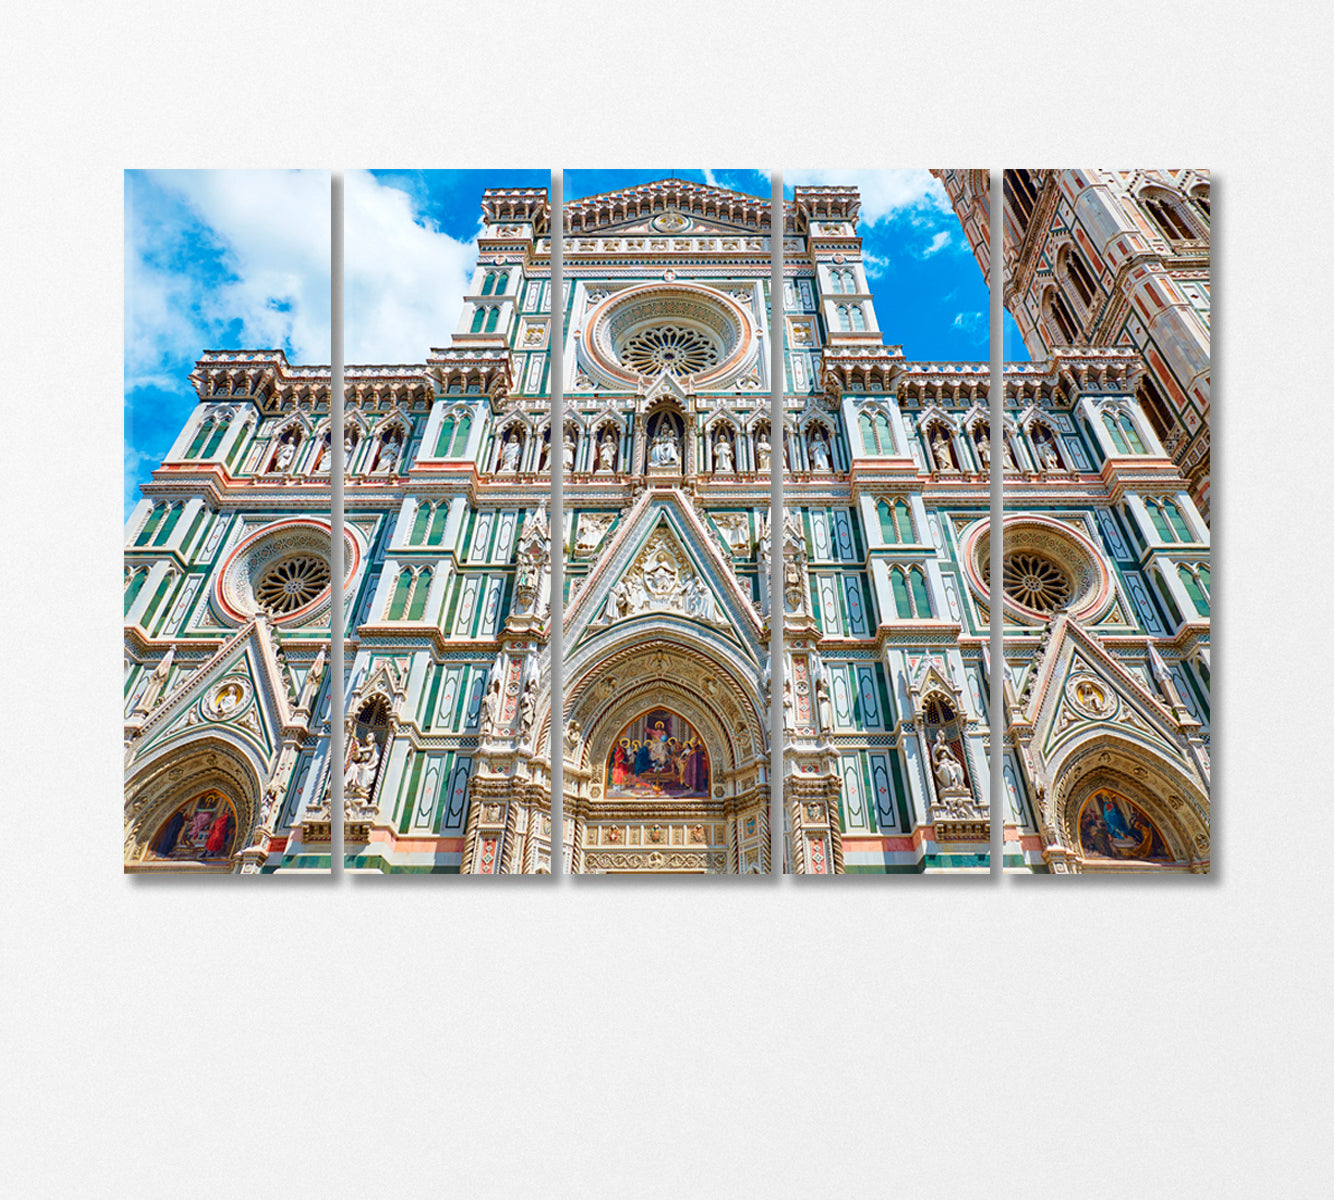 Cathedral in Florence Italy Canvas Print-CetArt-5 Panels-36x24 inches-CetArt